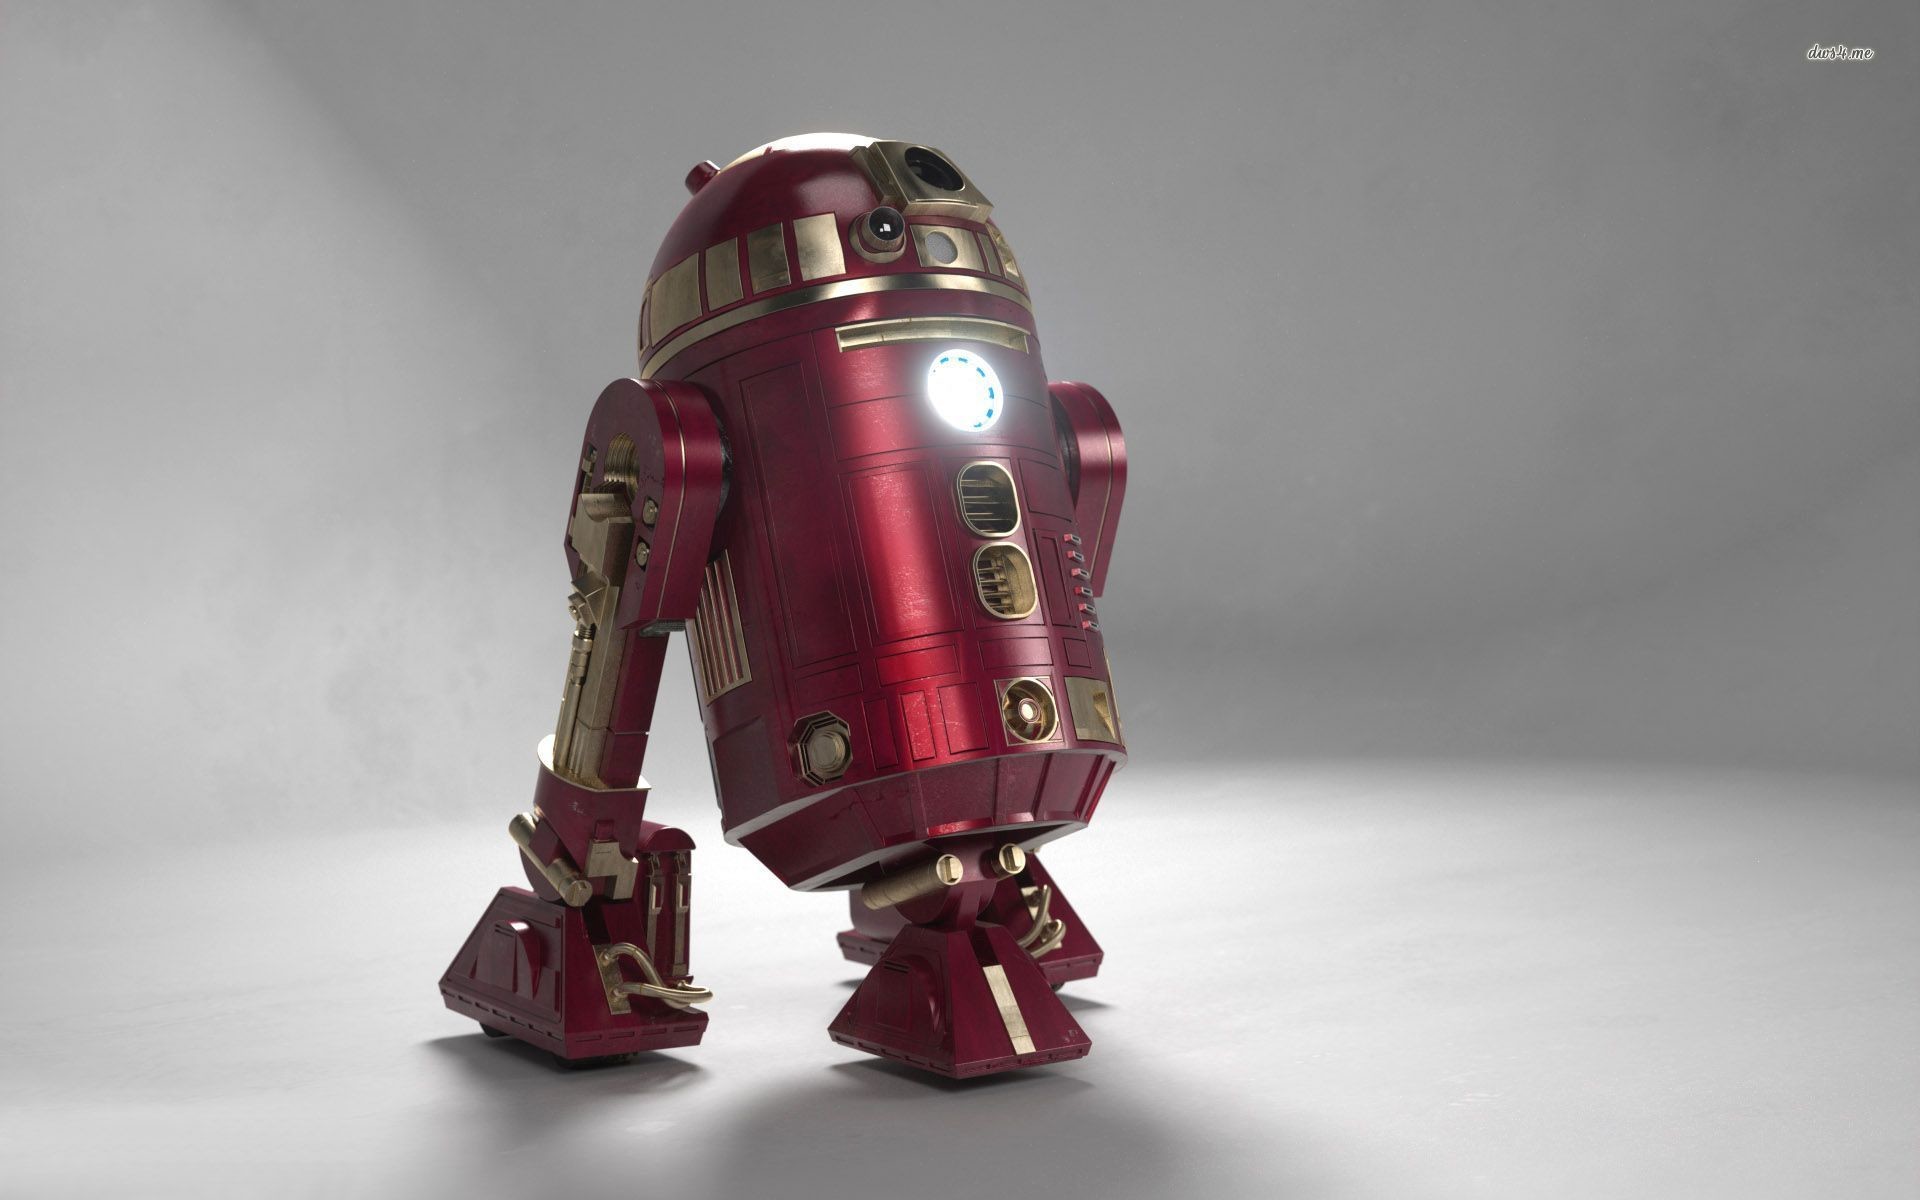 R2d2 In Iron Man Colors Images HD Wallpaper Movie #93930 Wallpaper